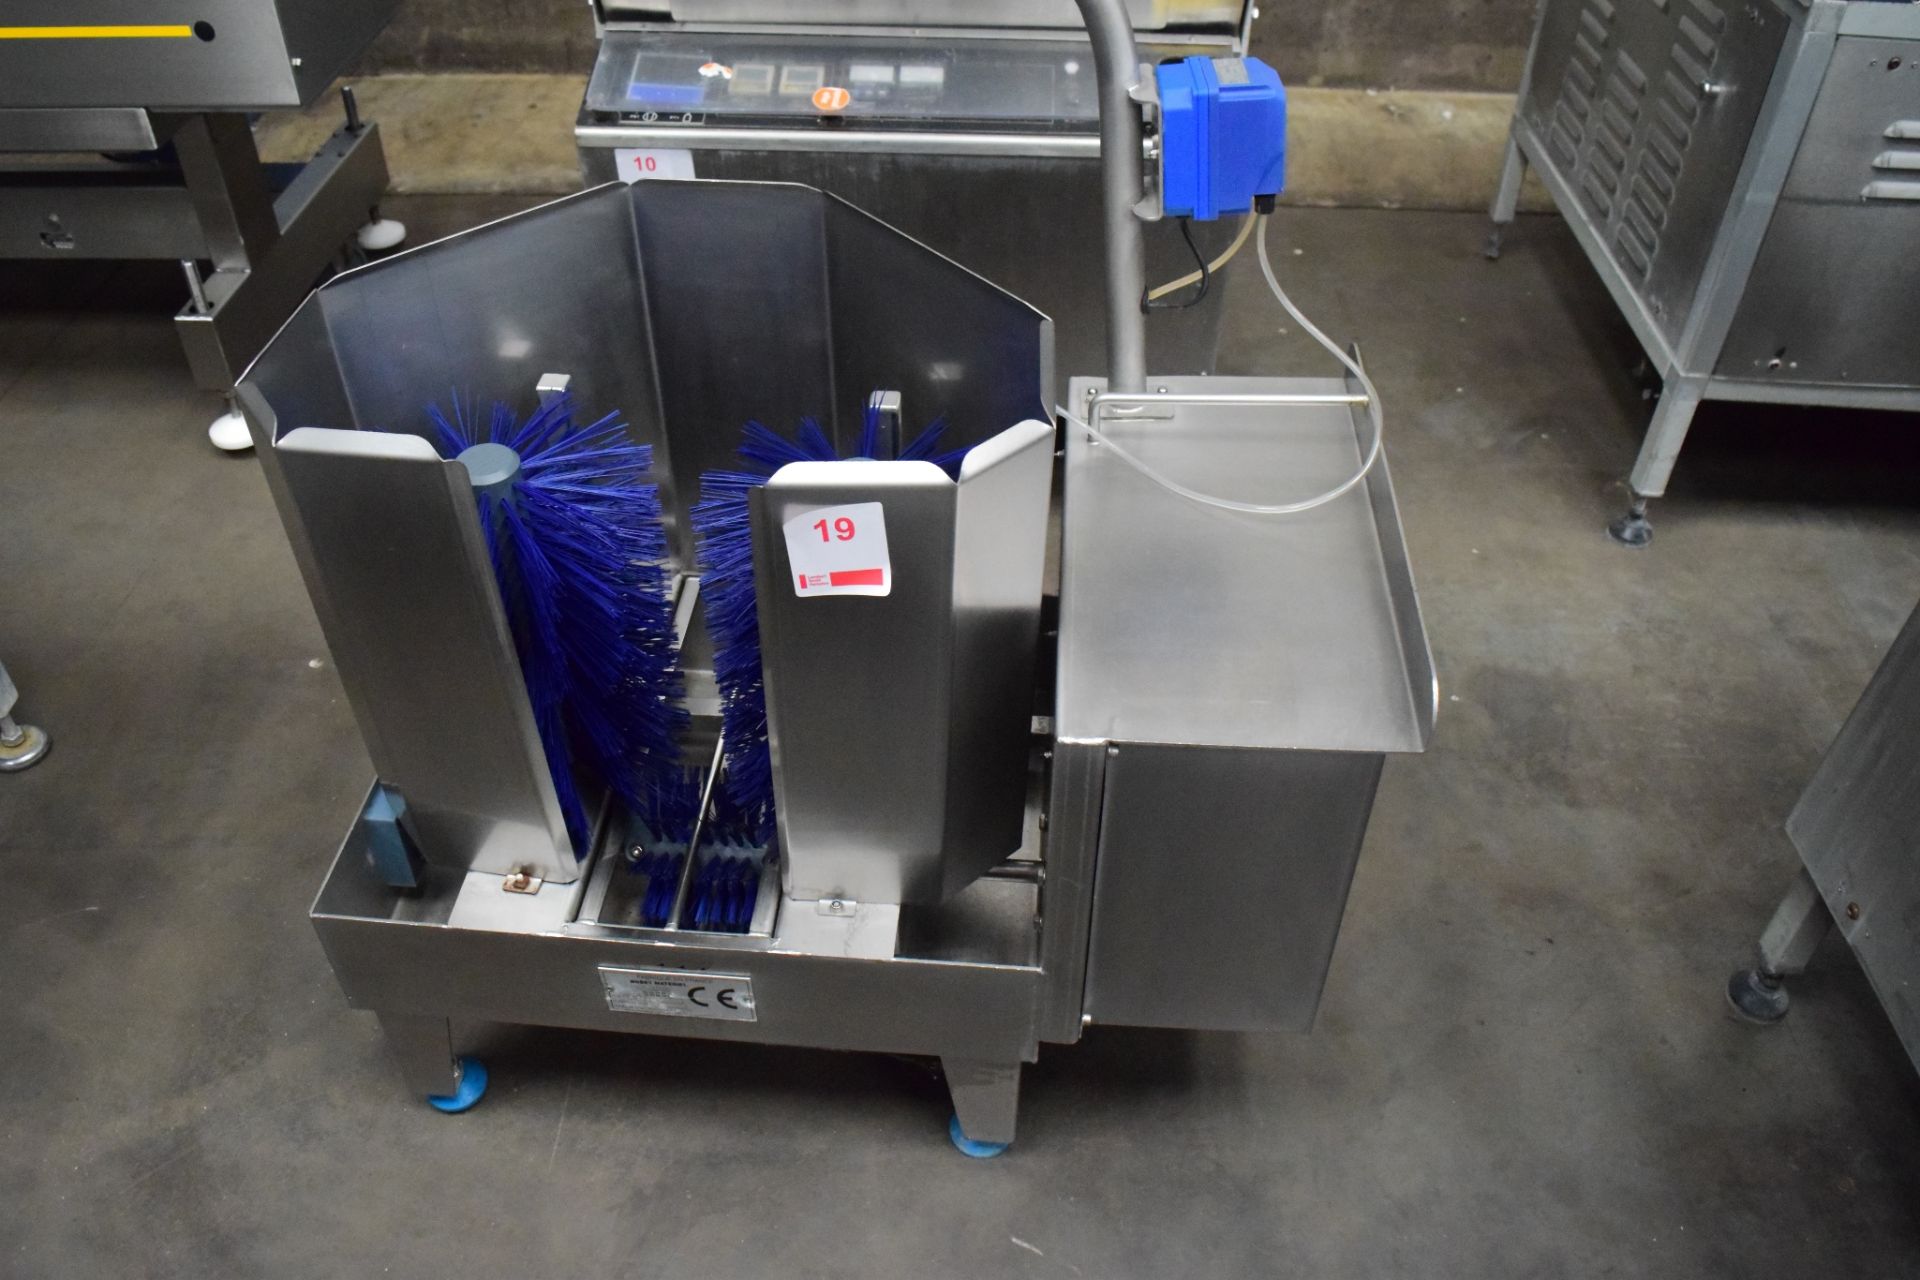 Bobet Materiel stainless steel boot washer, 2001. Overall dimensions: 1200 H x 800 L x 500 W Lift